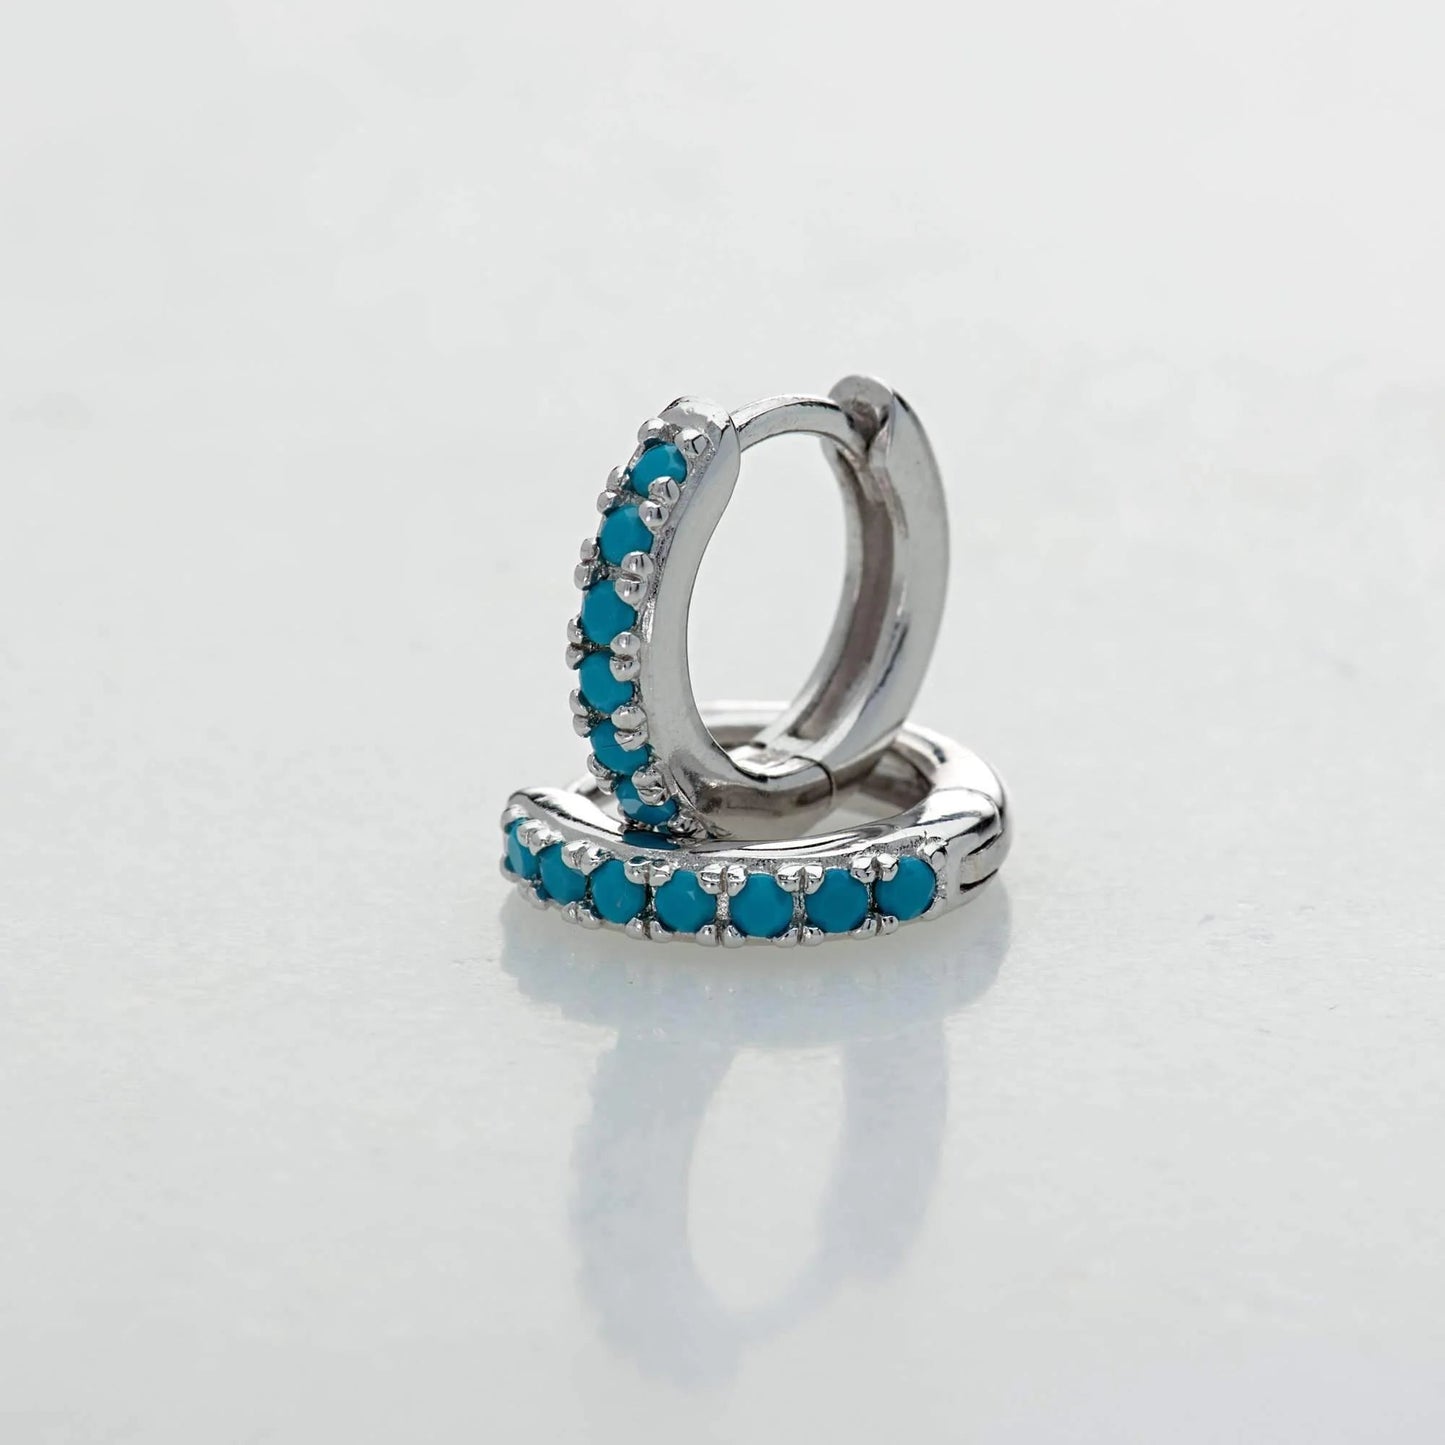 Silver Row Huggies Earrings with turquoise stones on a muted grey backdrop  - IceGlint